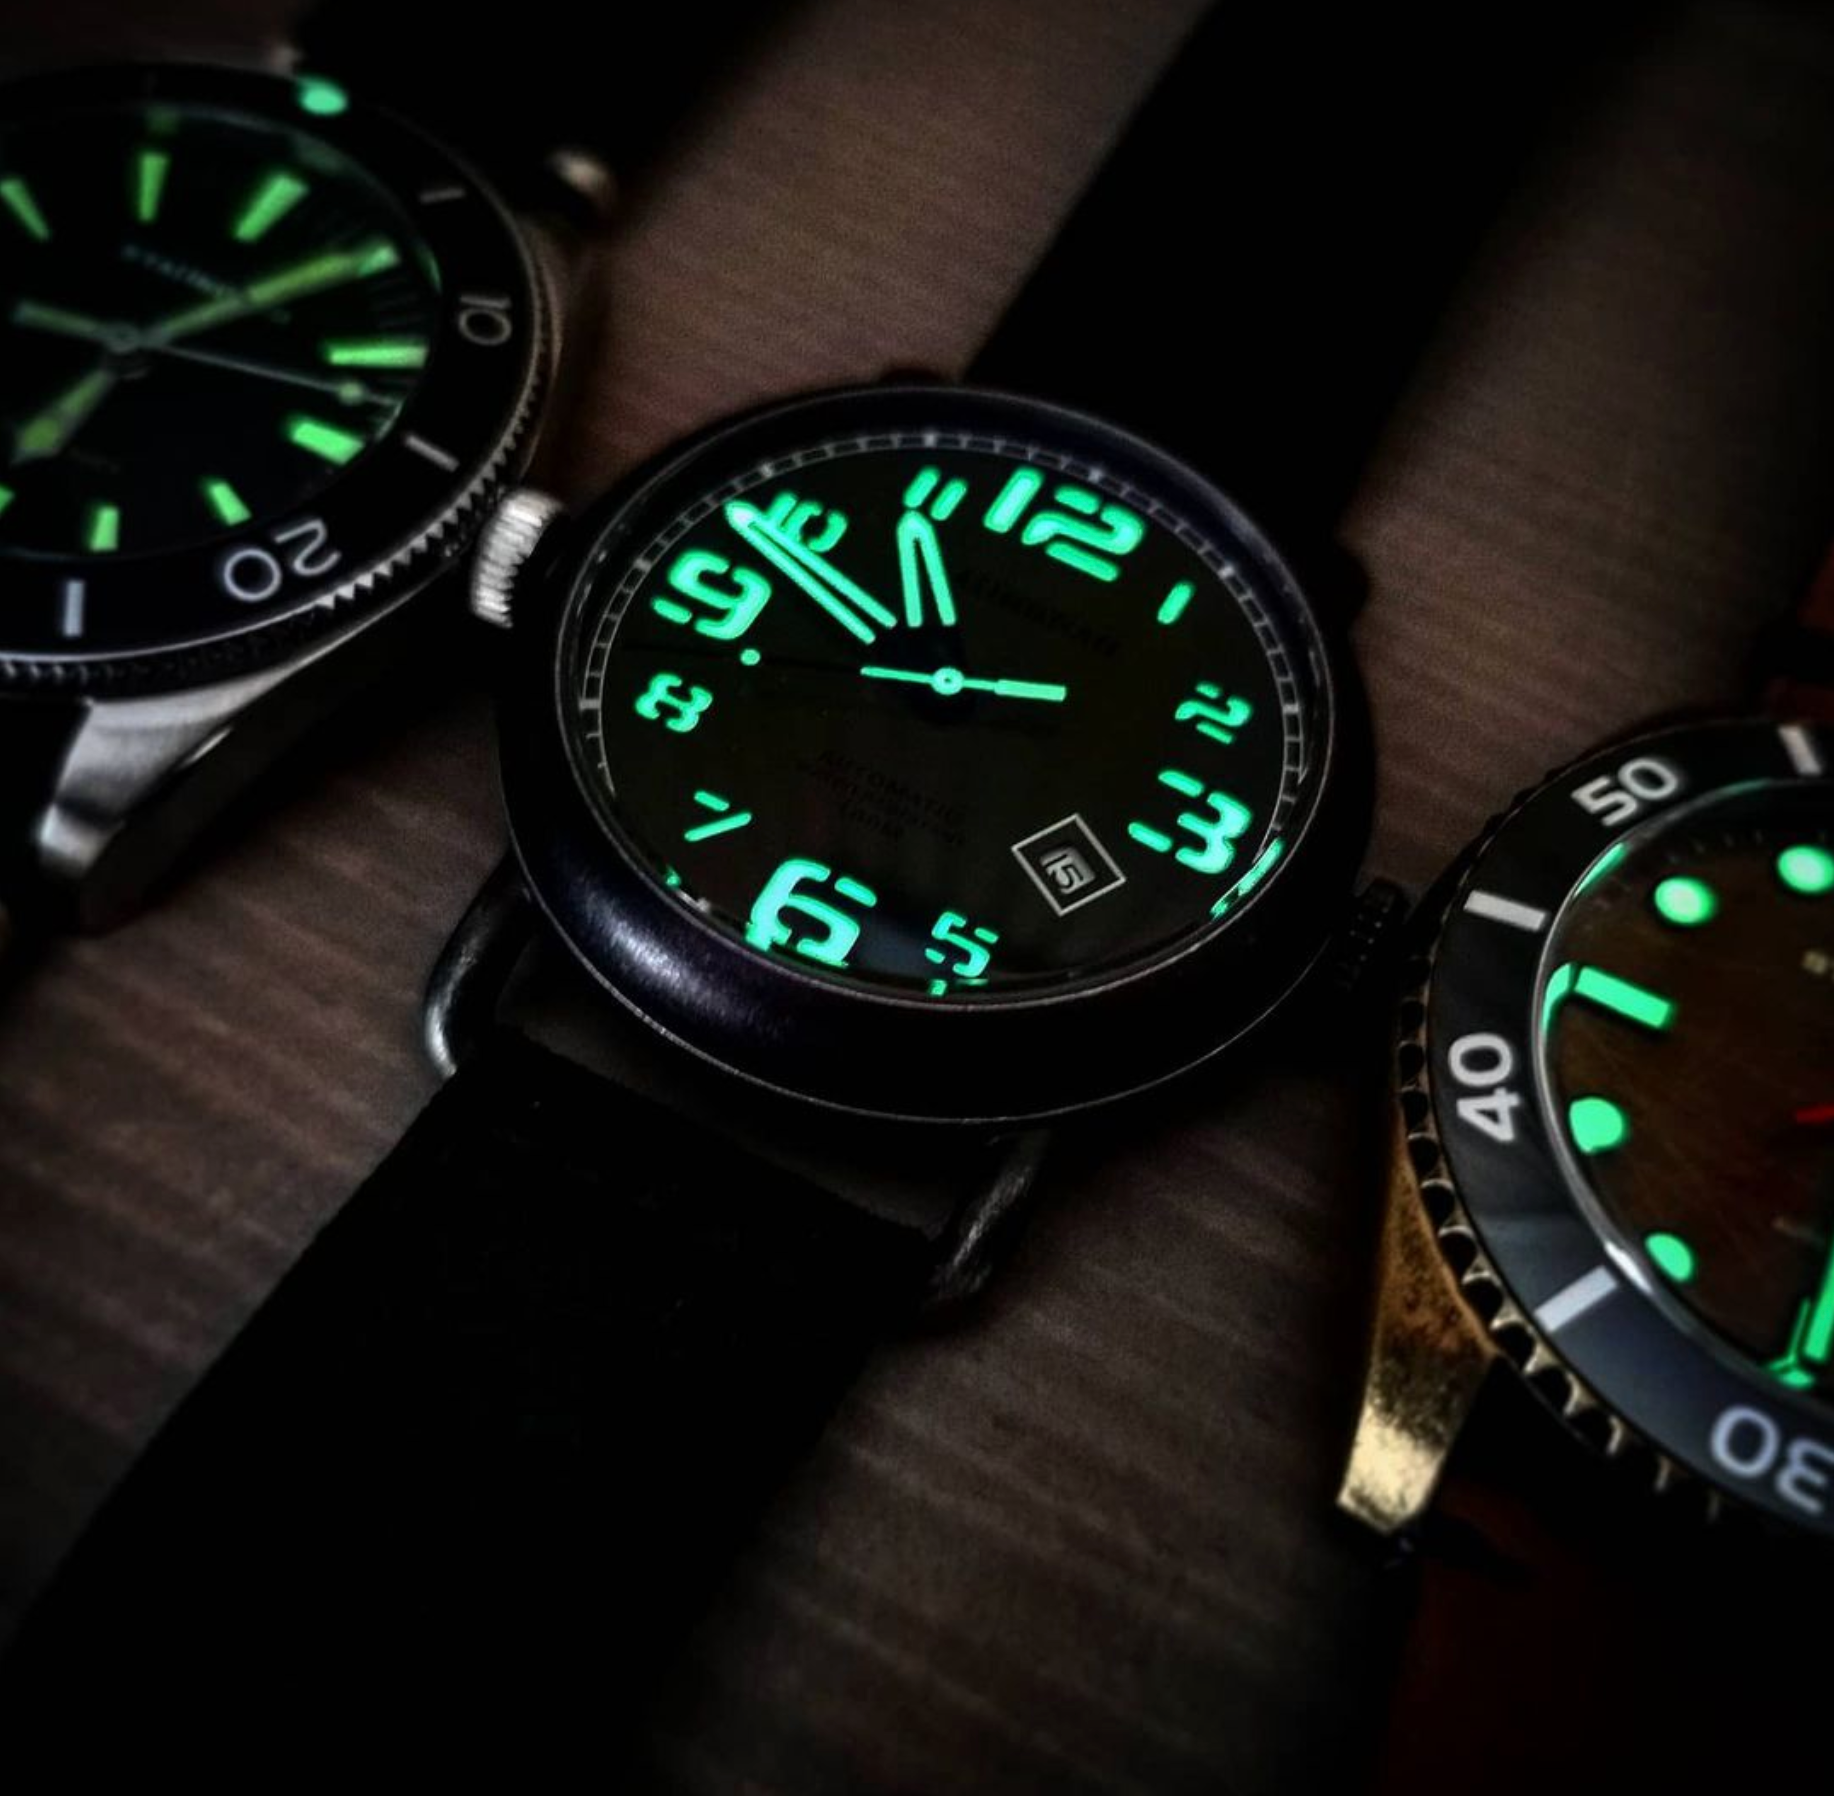 The History of Military-Inspired Watch Design